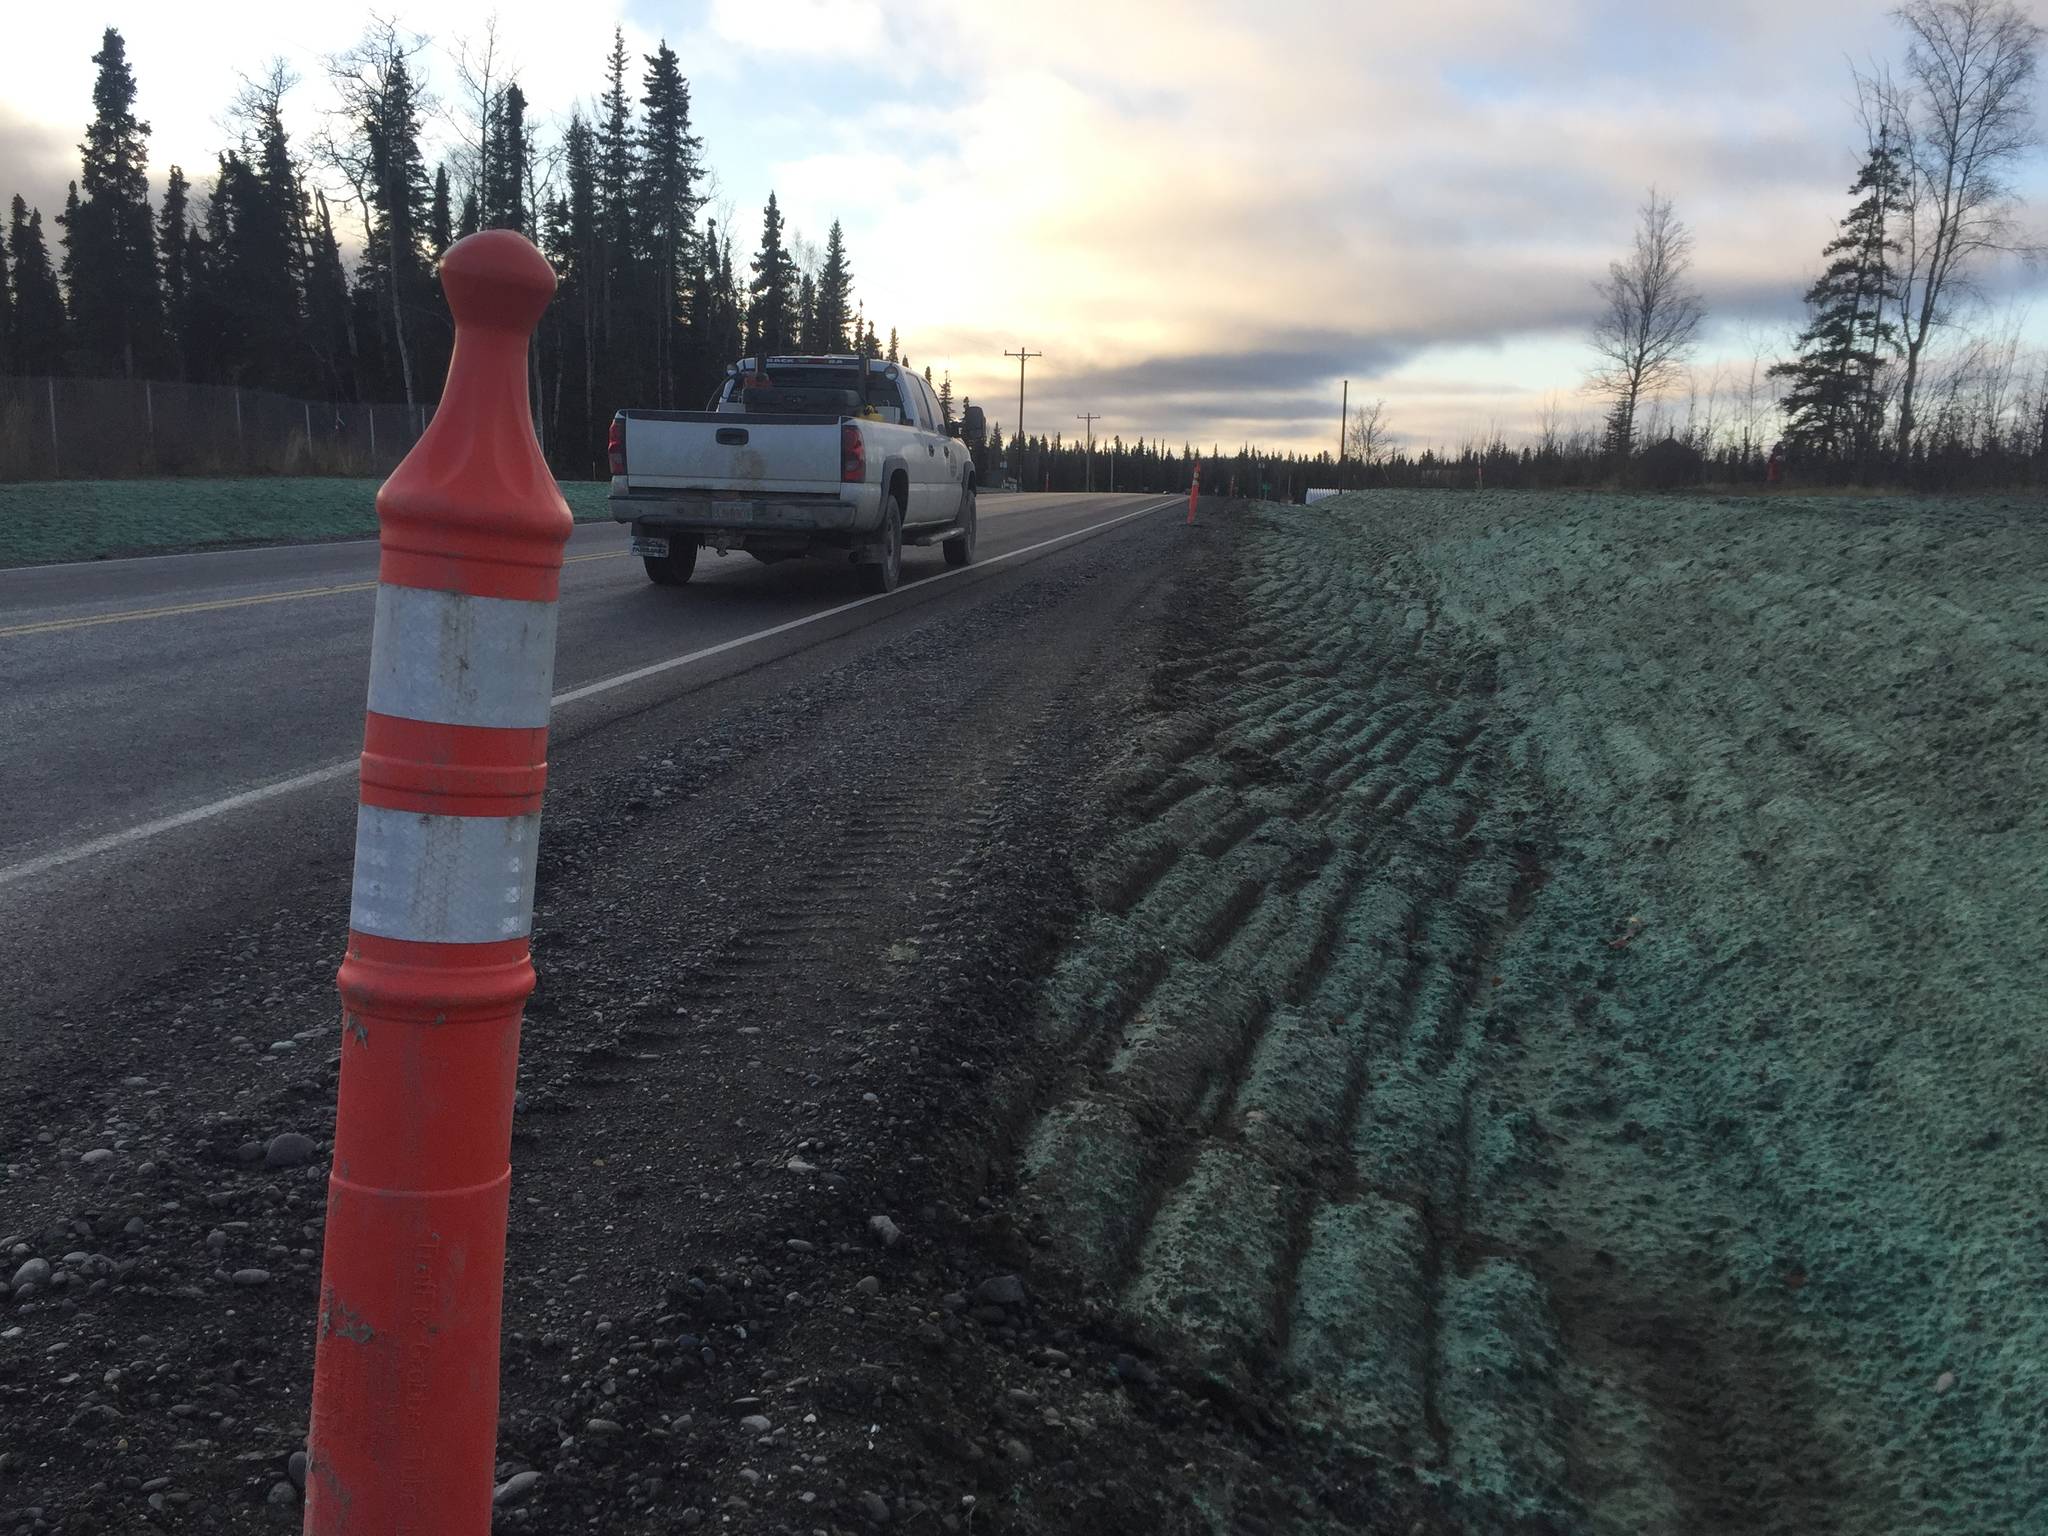 A truck drives down Funny River Road near the Soldotna Municipal Airport on Tuesday, Oct. 31, 2017 in Soldotna, Alaska. Construction crews finished working on preliminary work to widen the shoulders and improve ditching and signage along Funny River Road this week before packing up for the winter, to be continued in summer 2018. (Photo by Elizabeth Earl/Peninsula Clarion)